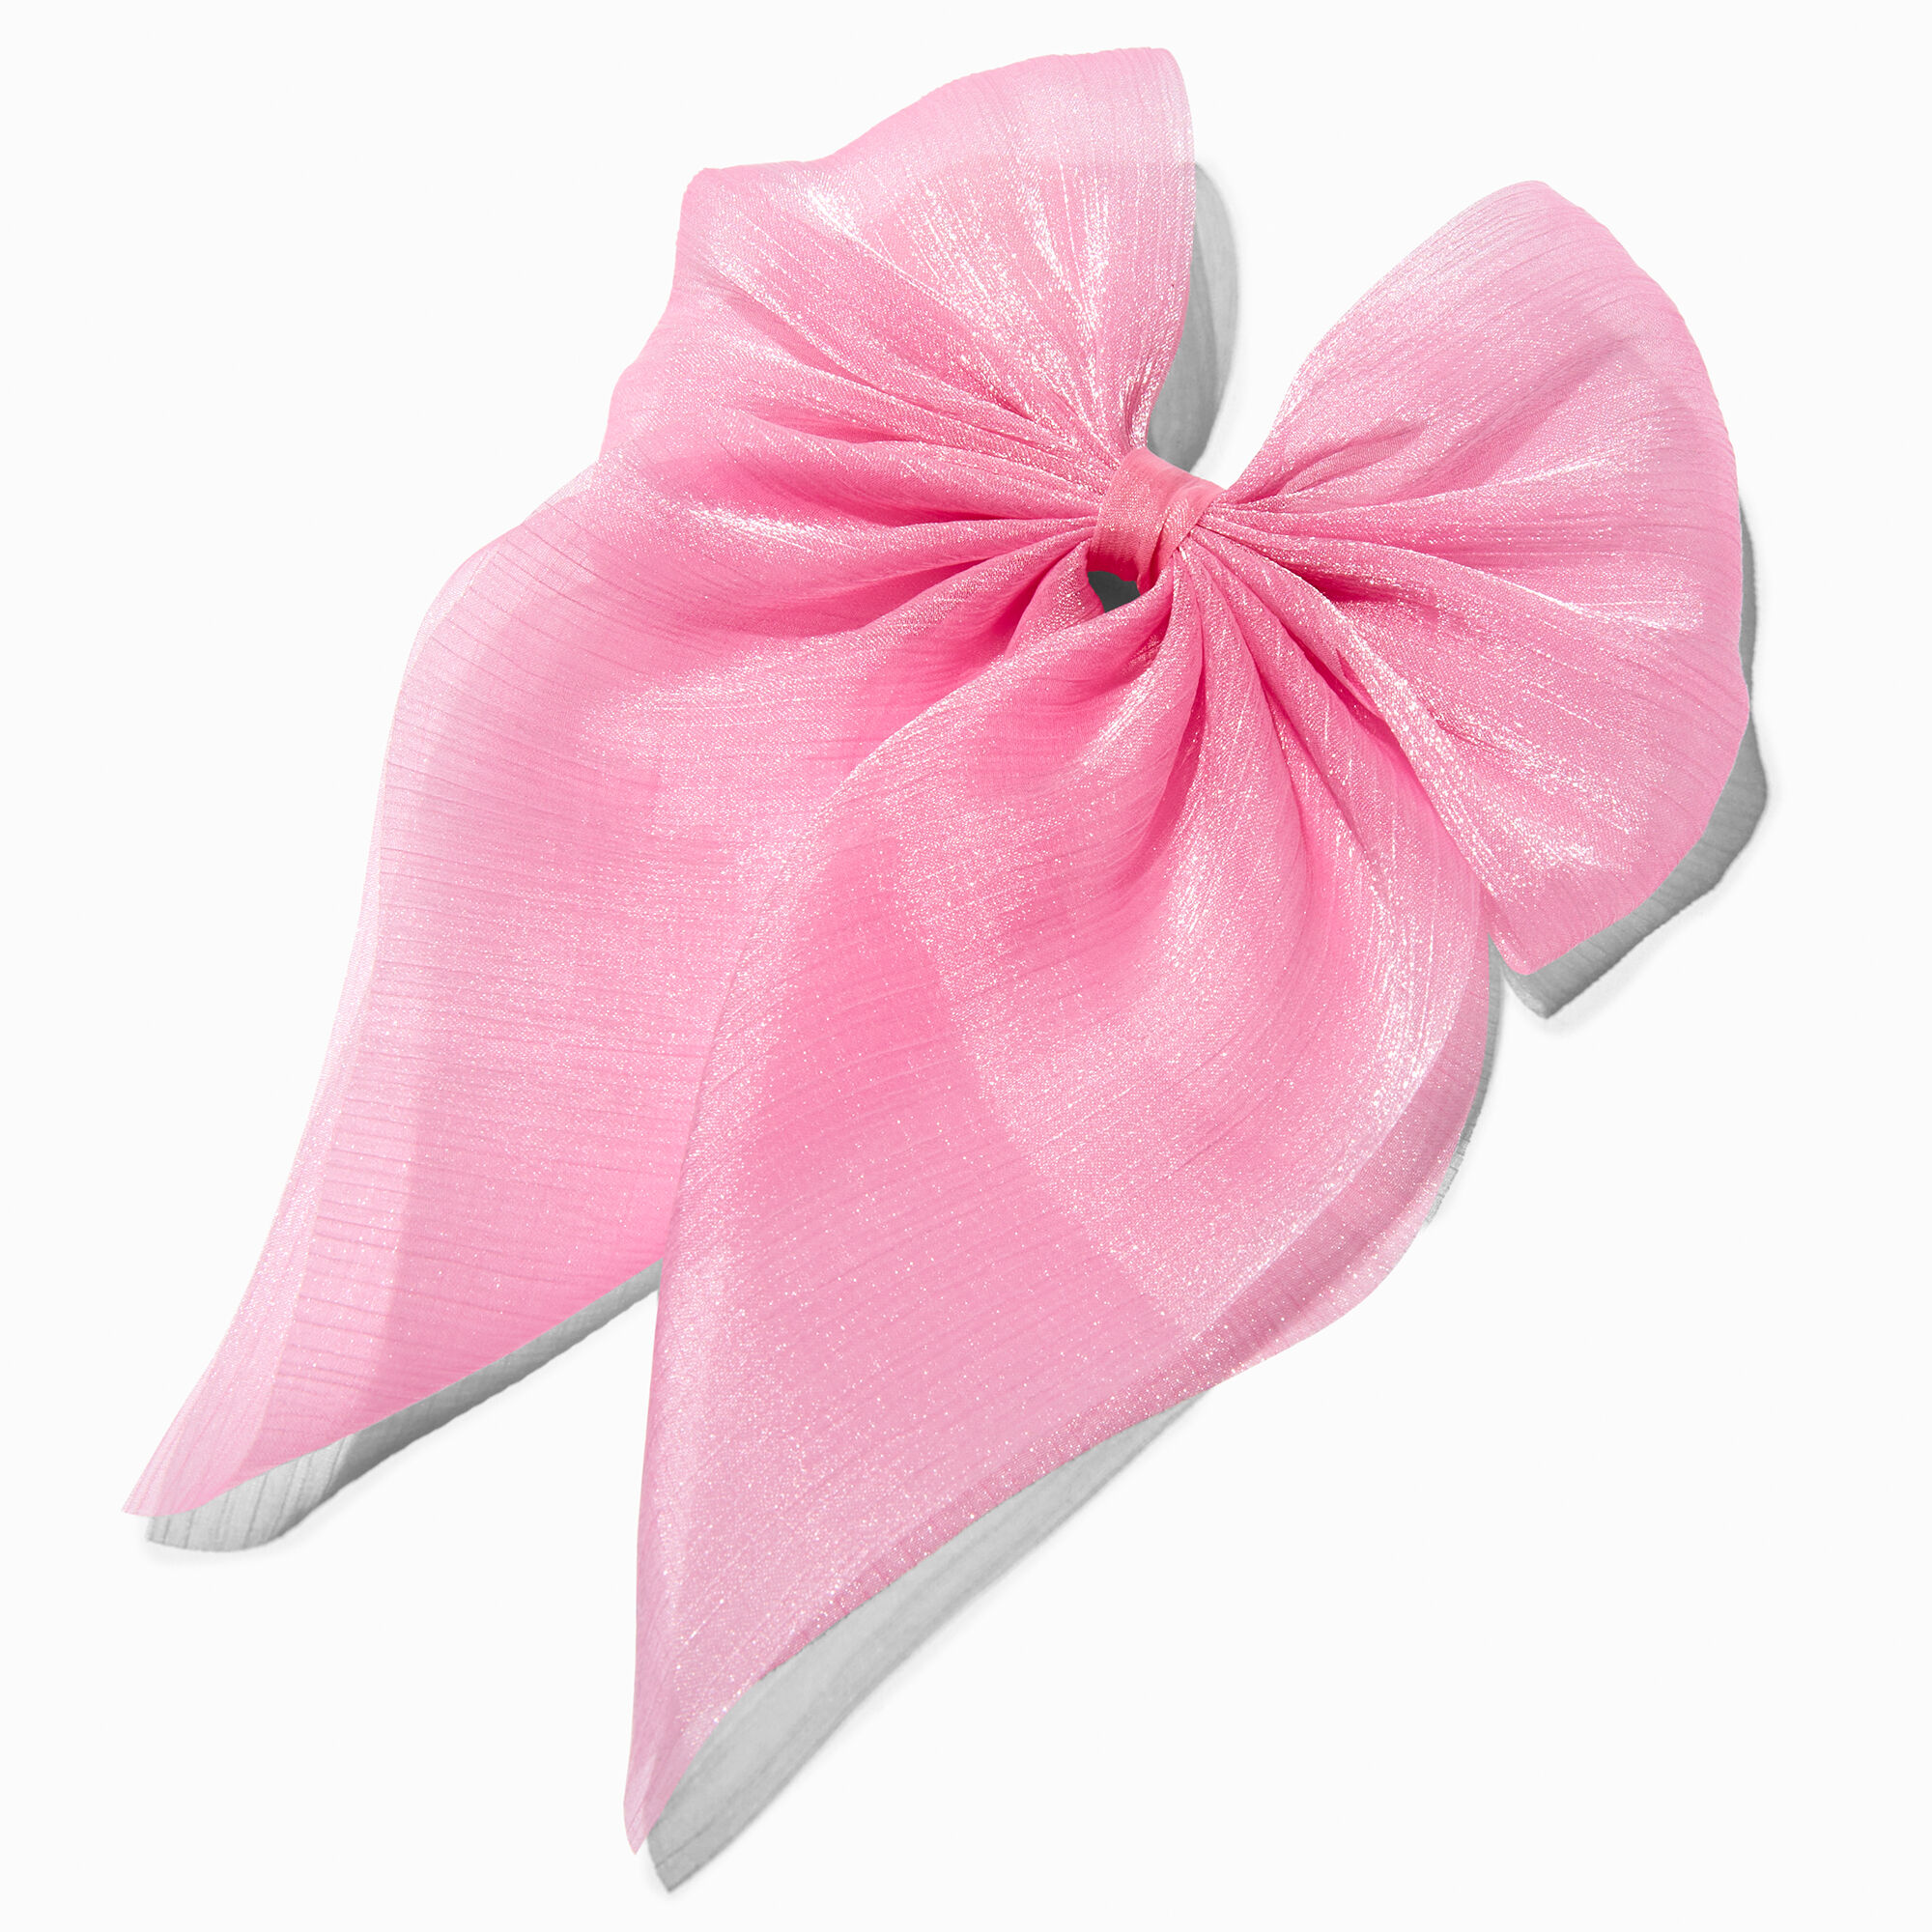 View Claires Sheer Bow Hair Clip Pink information